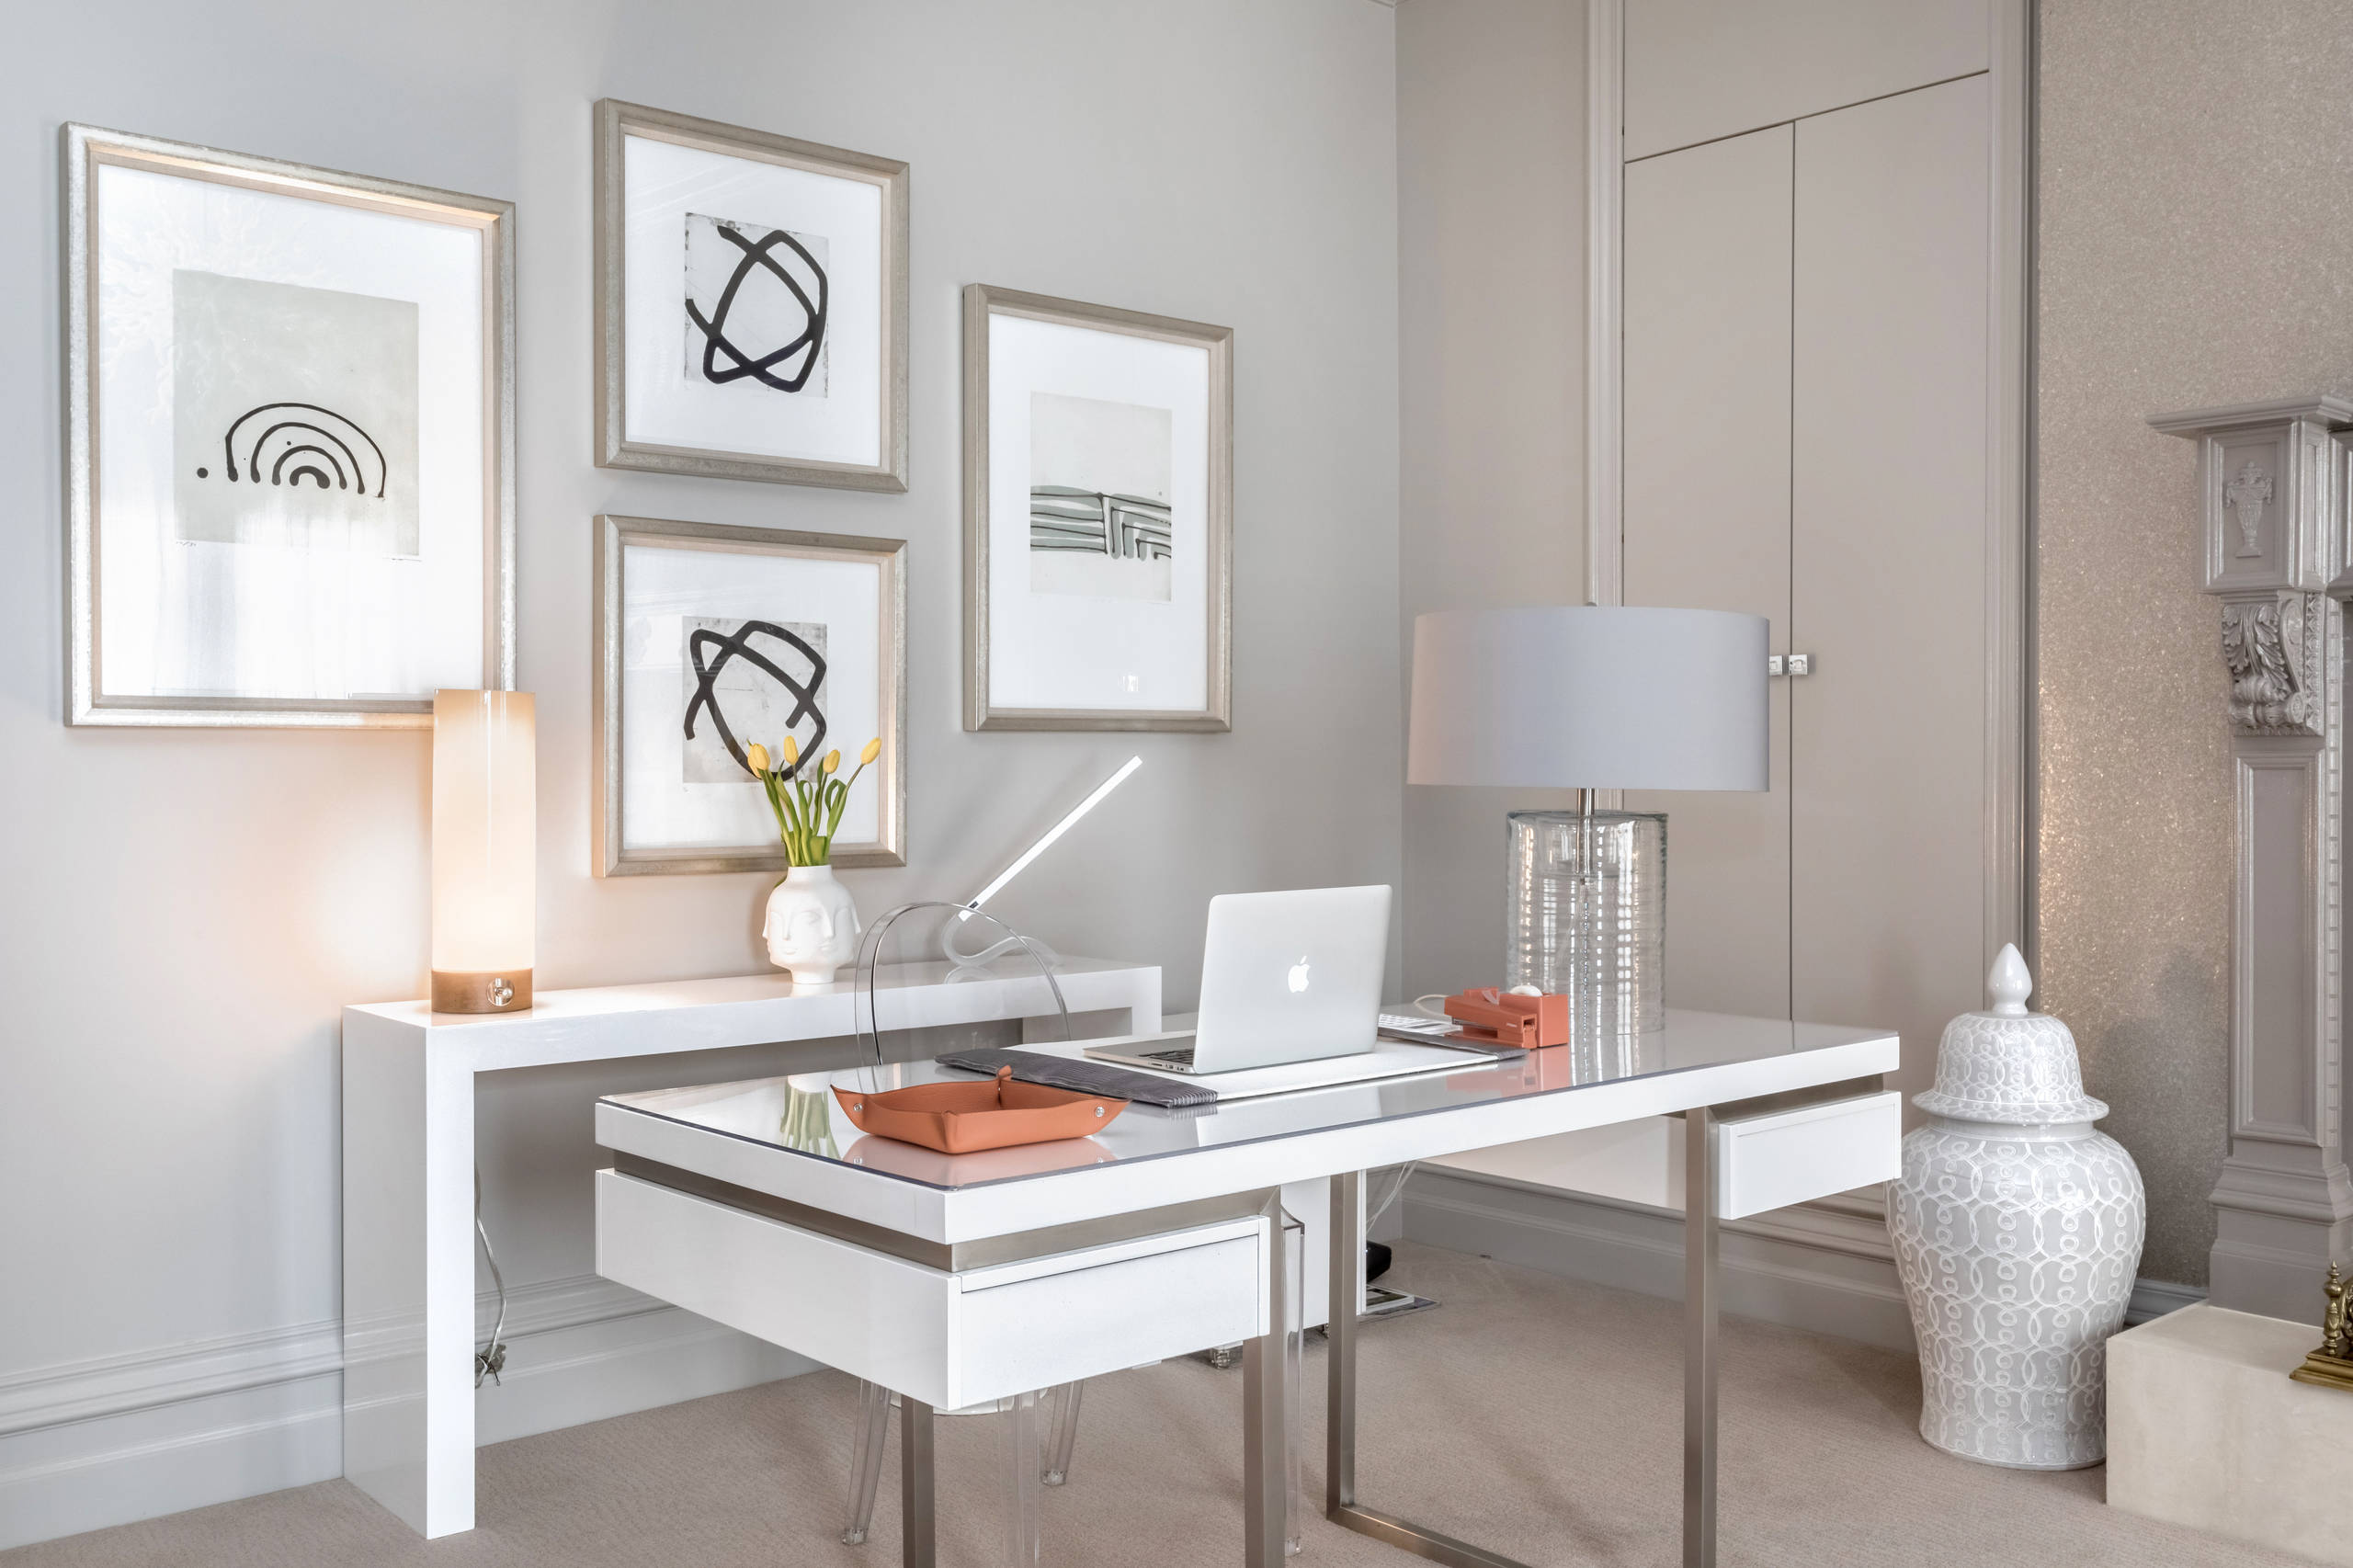 75 Carpeted Home Office Ideas You'll Love - March, 2022 | Houzz